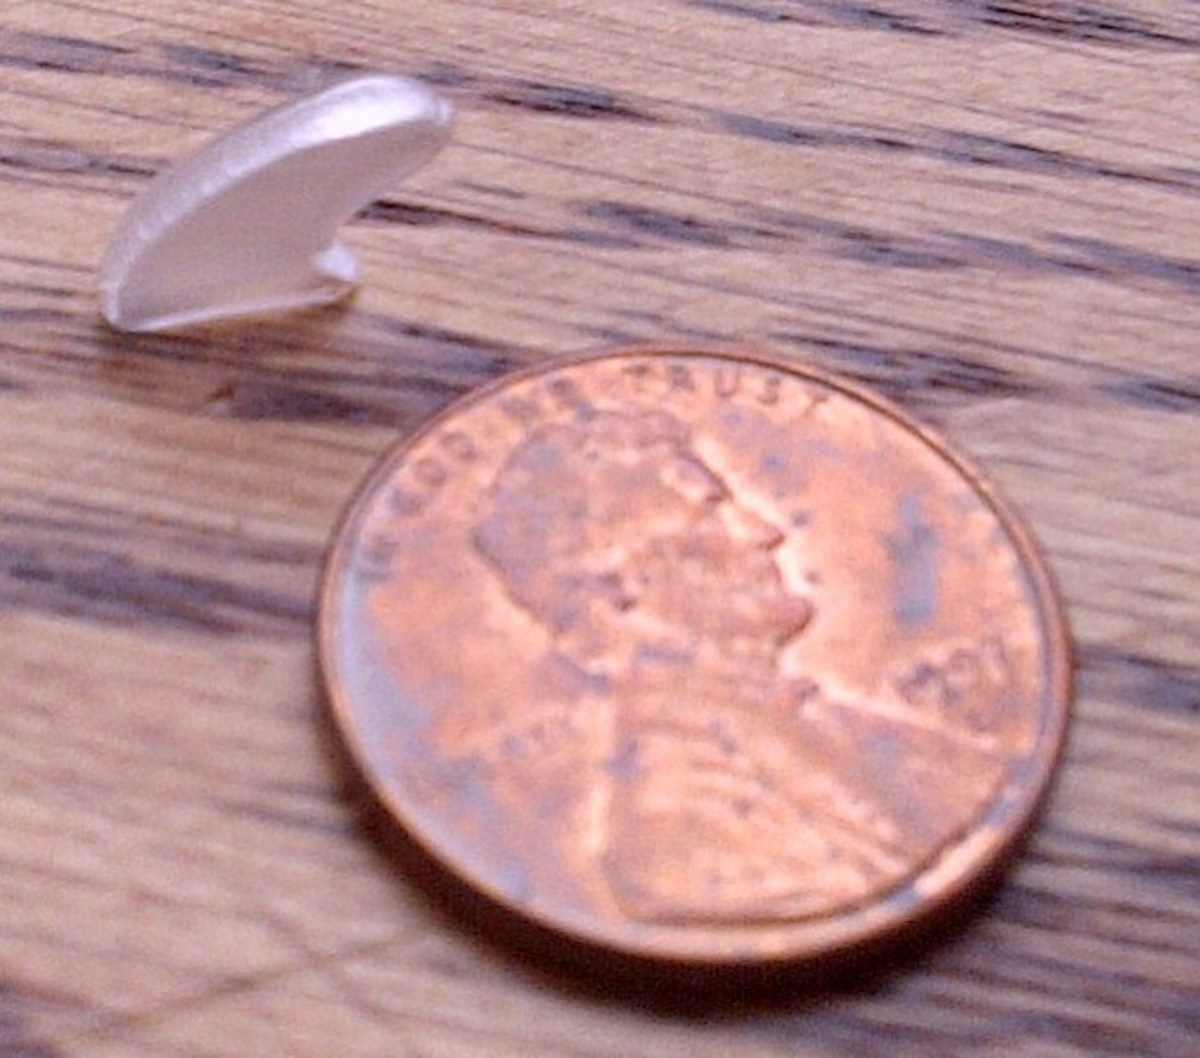 Claw caps are hollow and fit over the cat's claws.